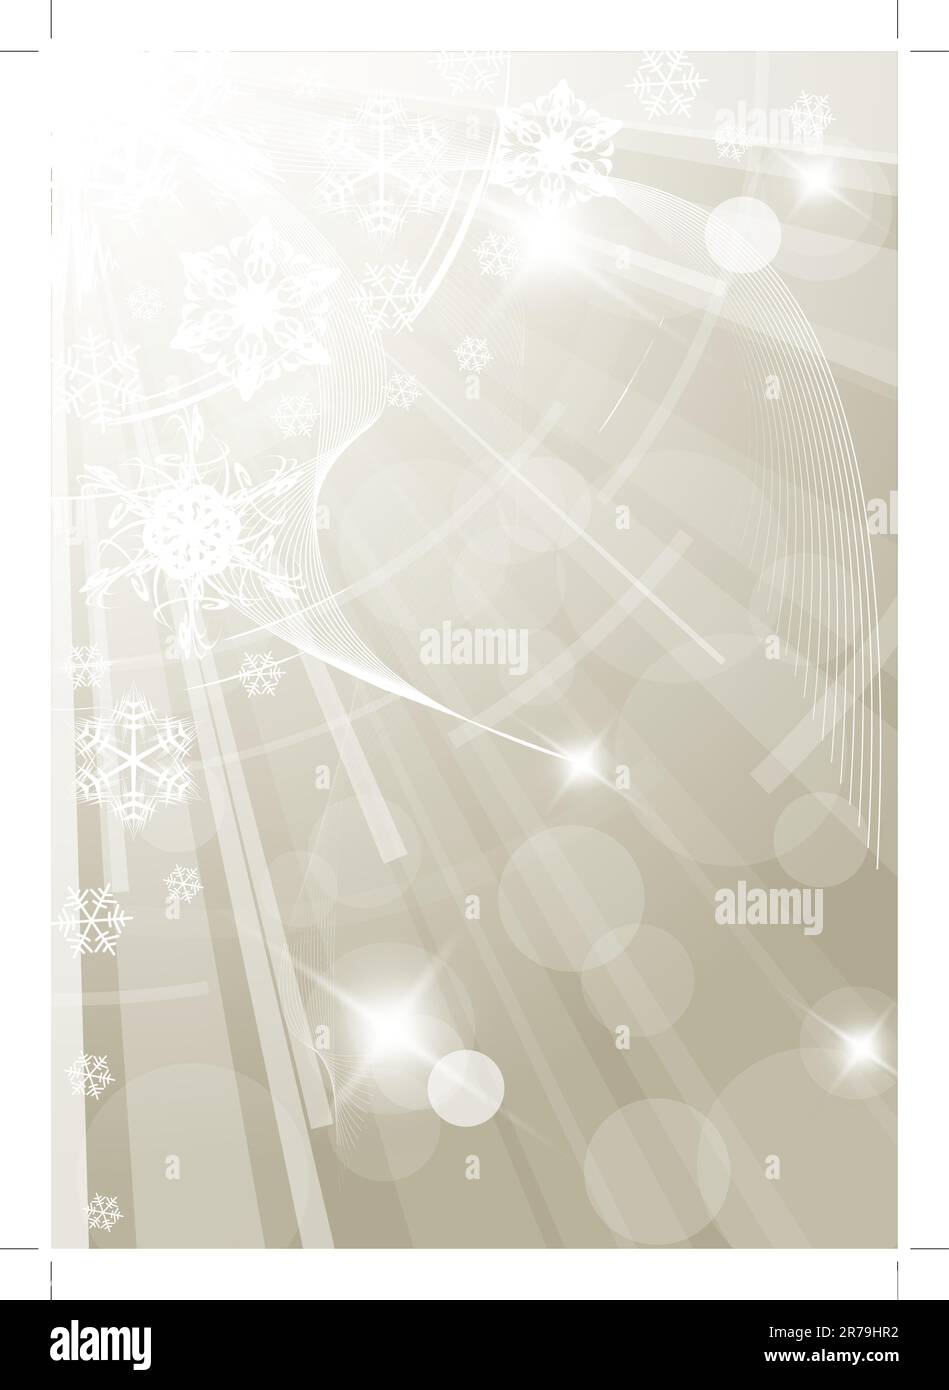 Christmas background with white snowflakes light golden version Stock Vector